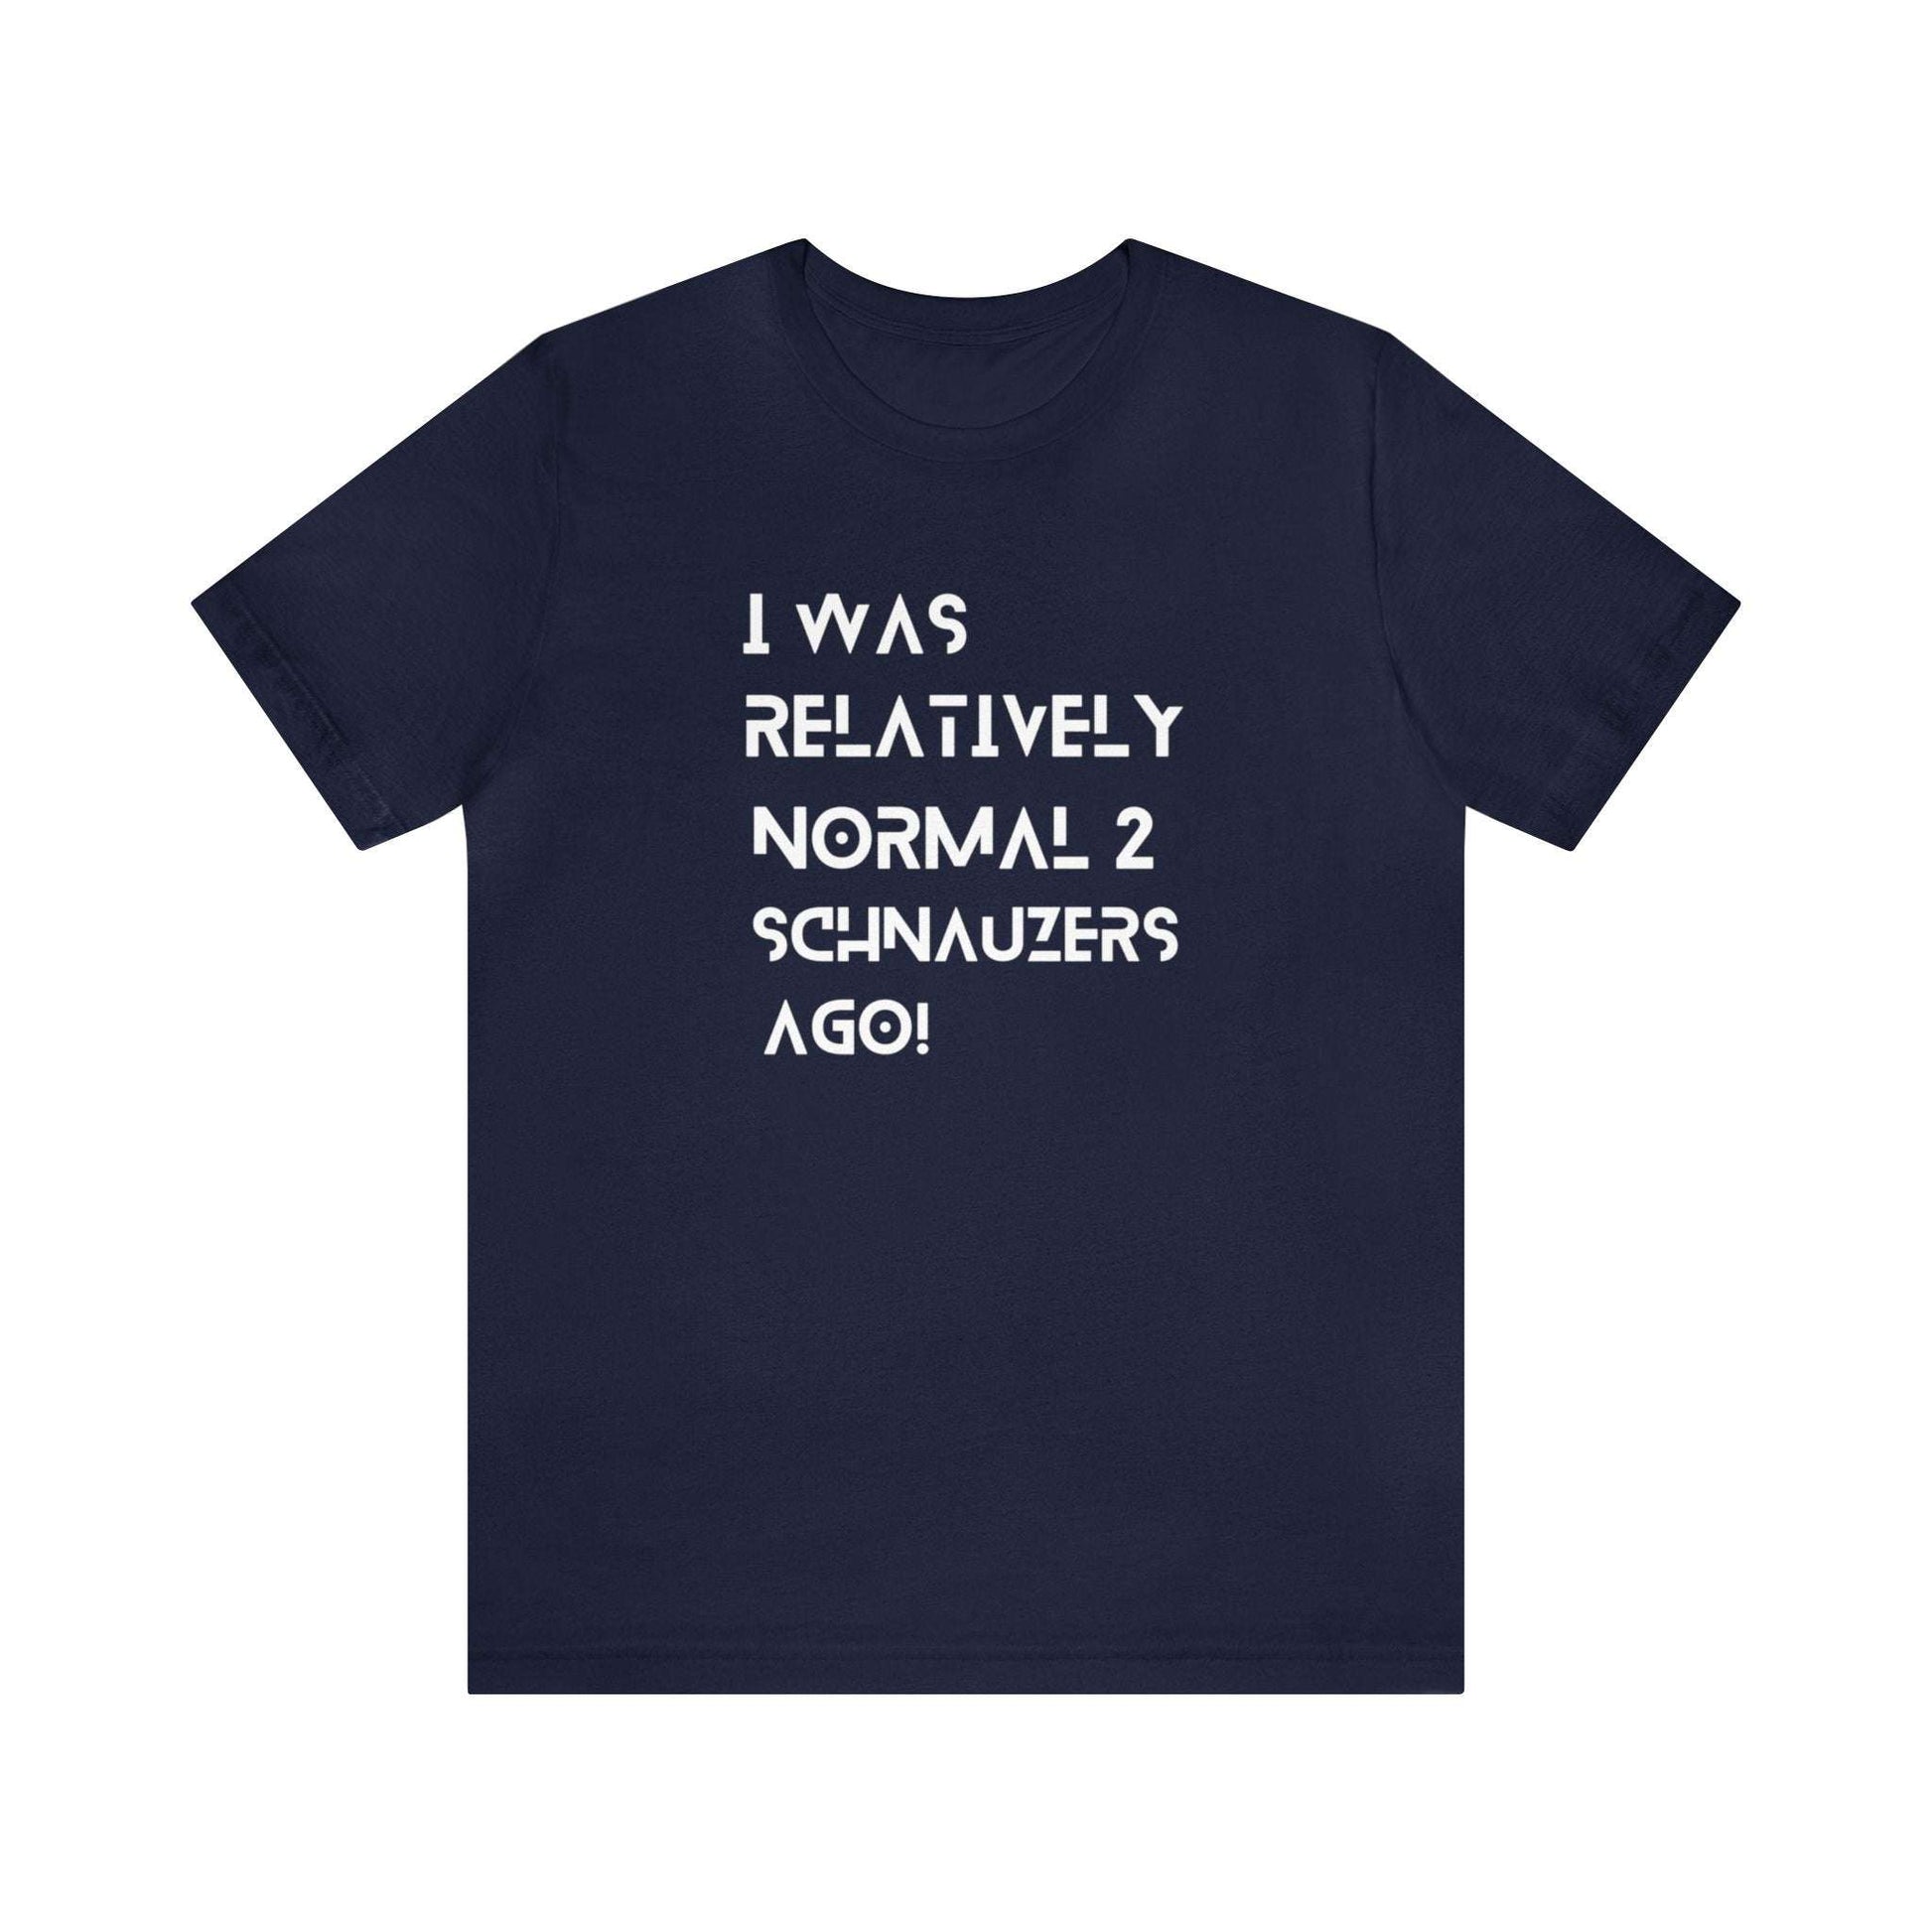 Fabulous Tee Shirts' 'I Was Relatively Normal 2 Schnauzers Ago' blue t-shirt displayed to emphasize its superior quality.